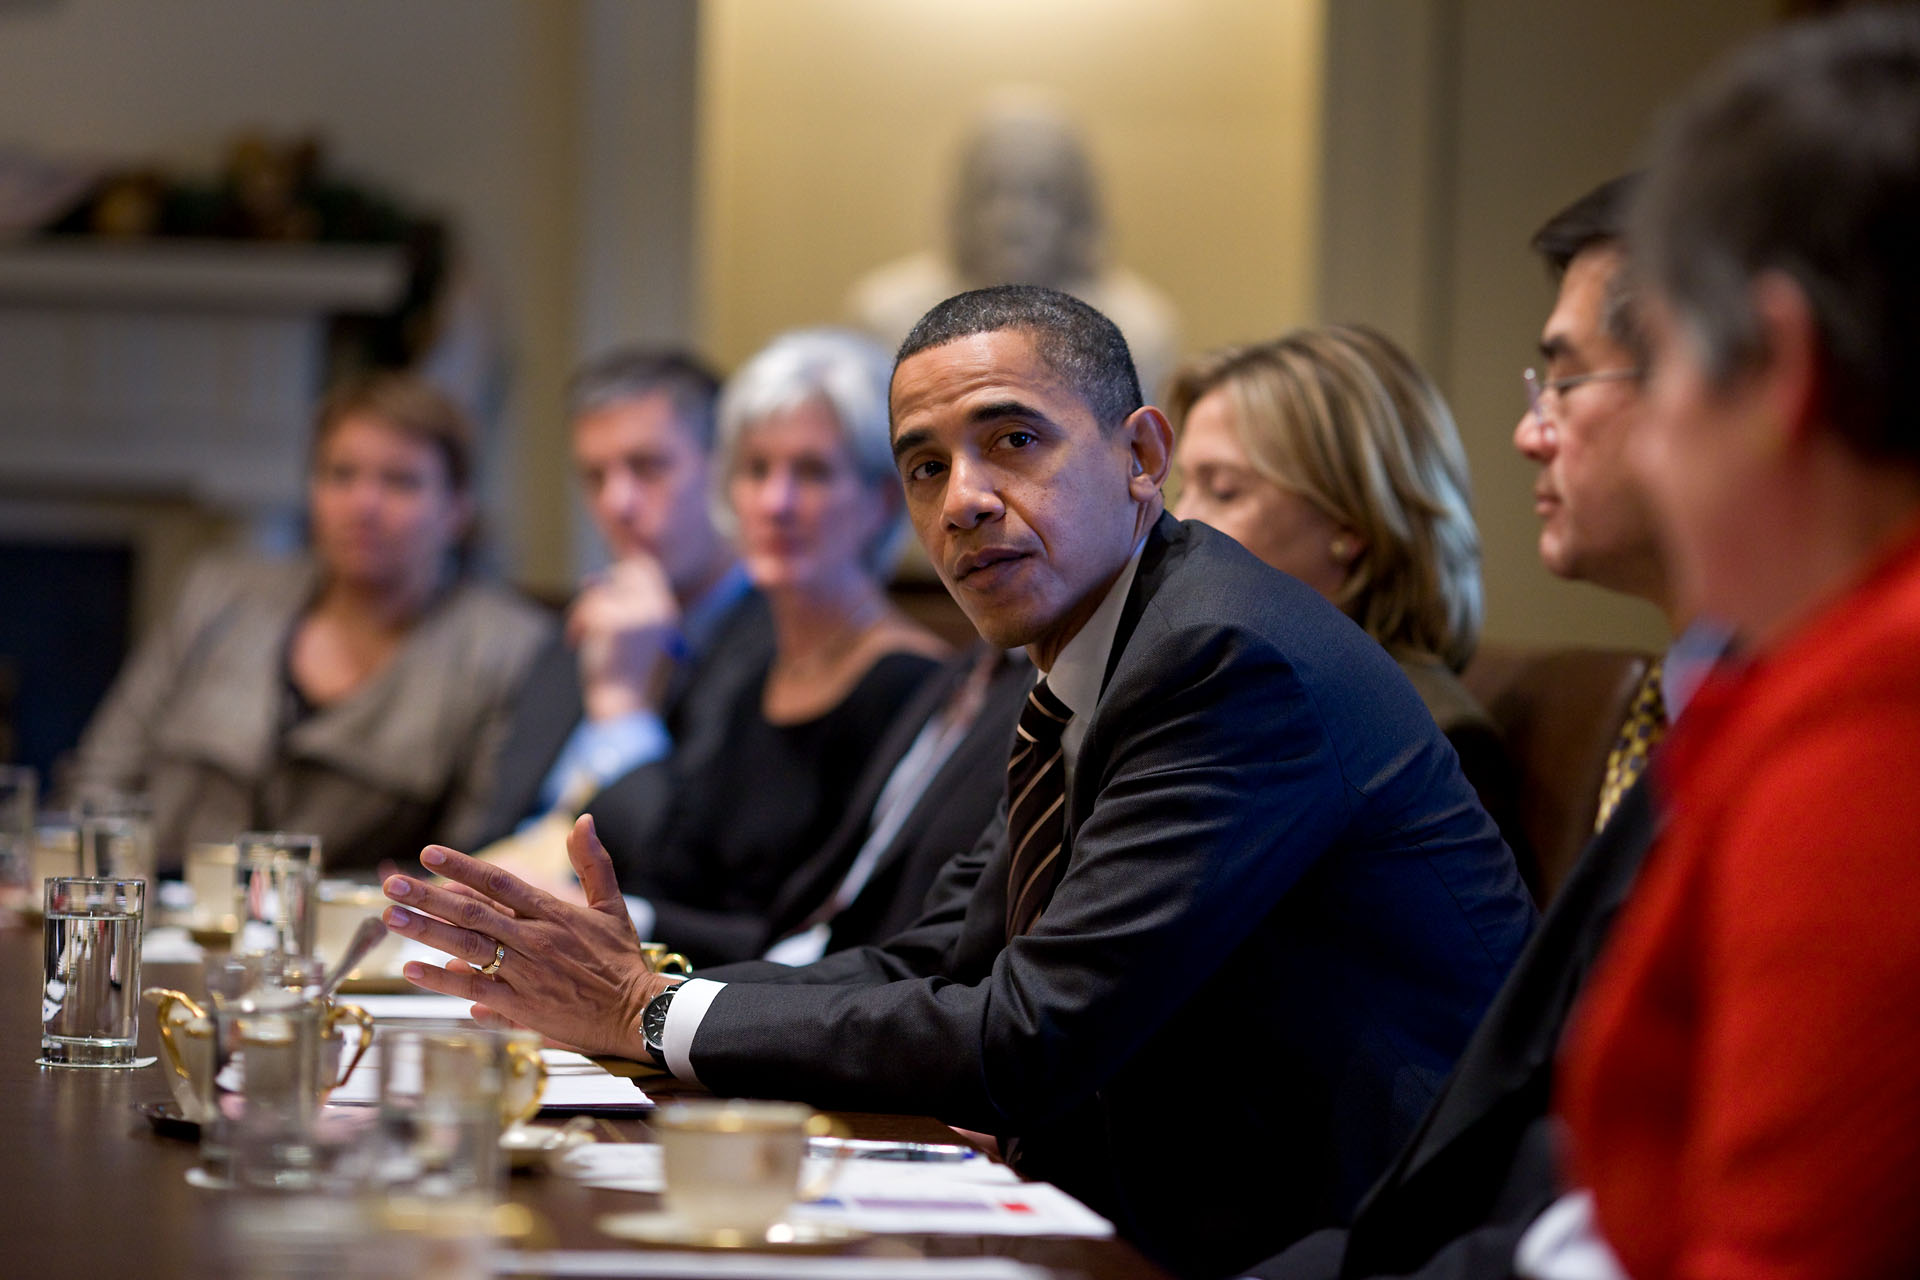 The President Convenes the Cabinet on December 8th, 2010